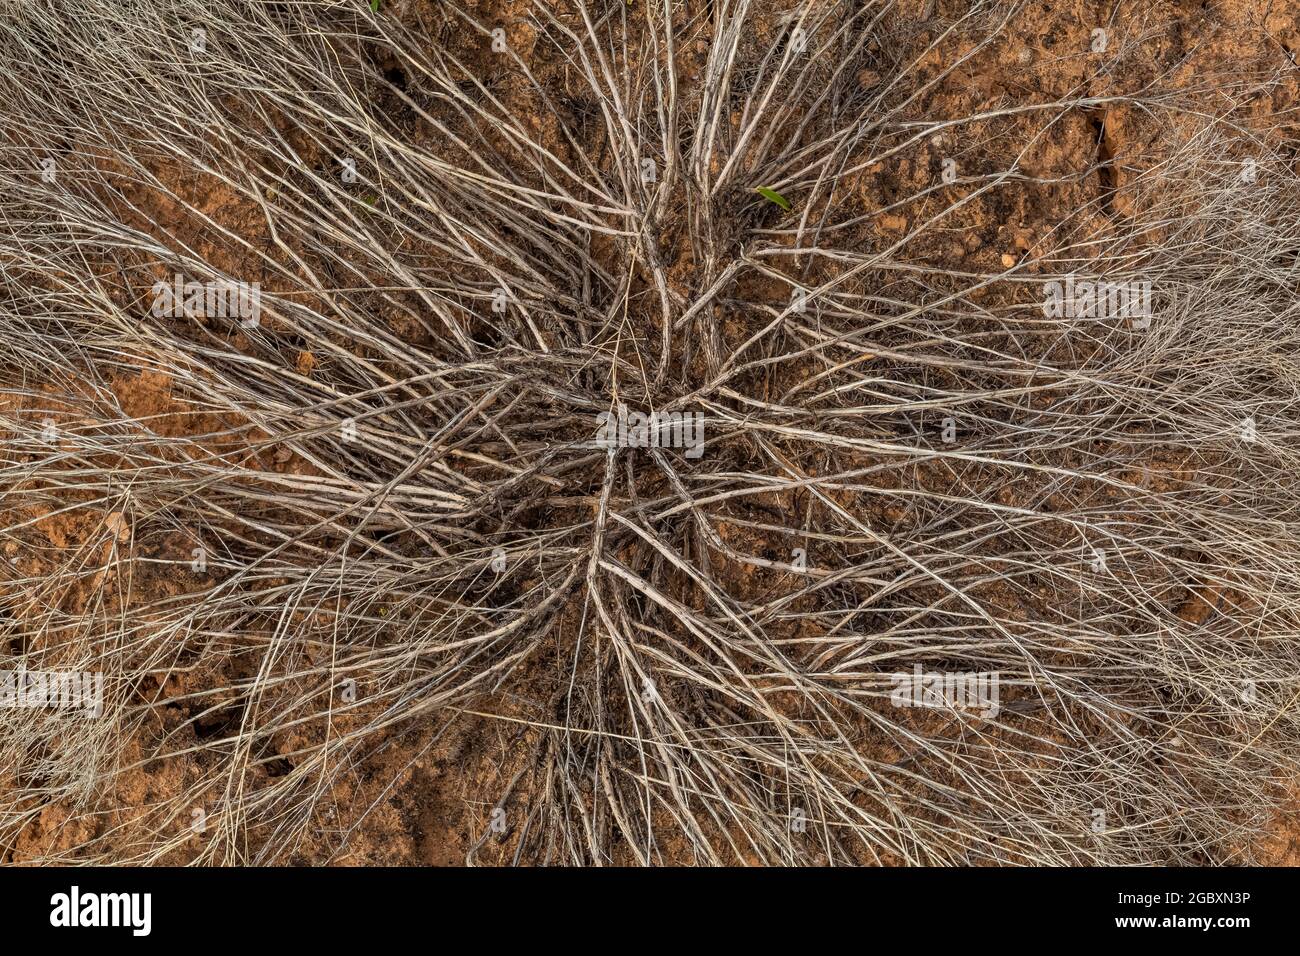 Stem design of an unknown plant in Hackberry Pueblo area of Hovenweep National Monument, Colorado, USA Stock Photo